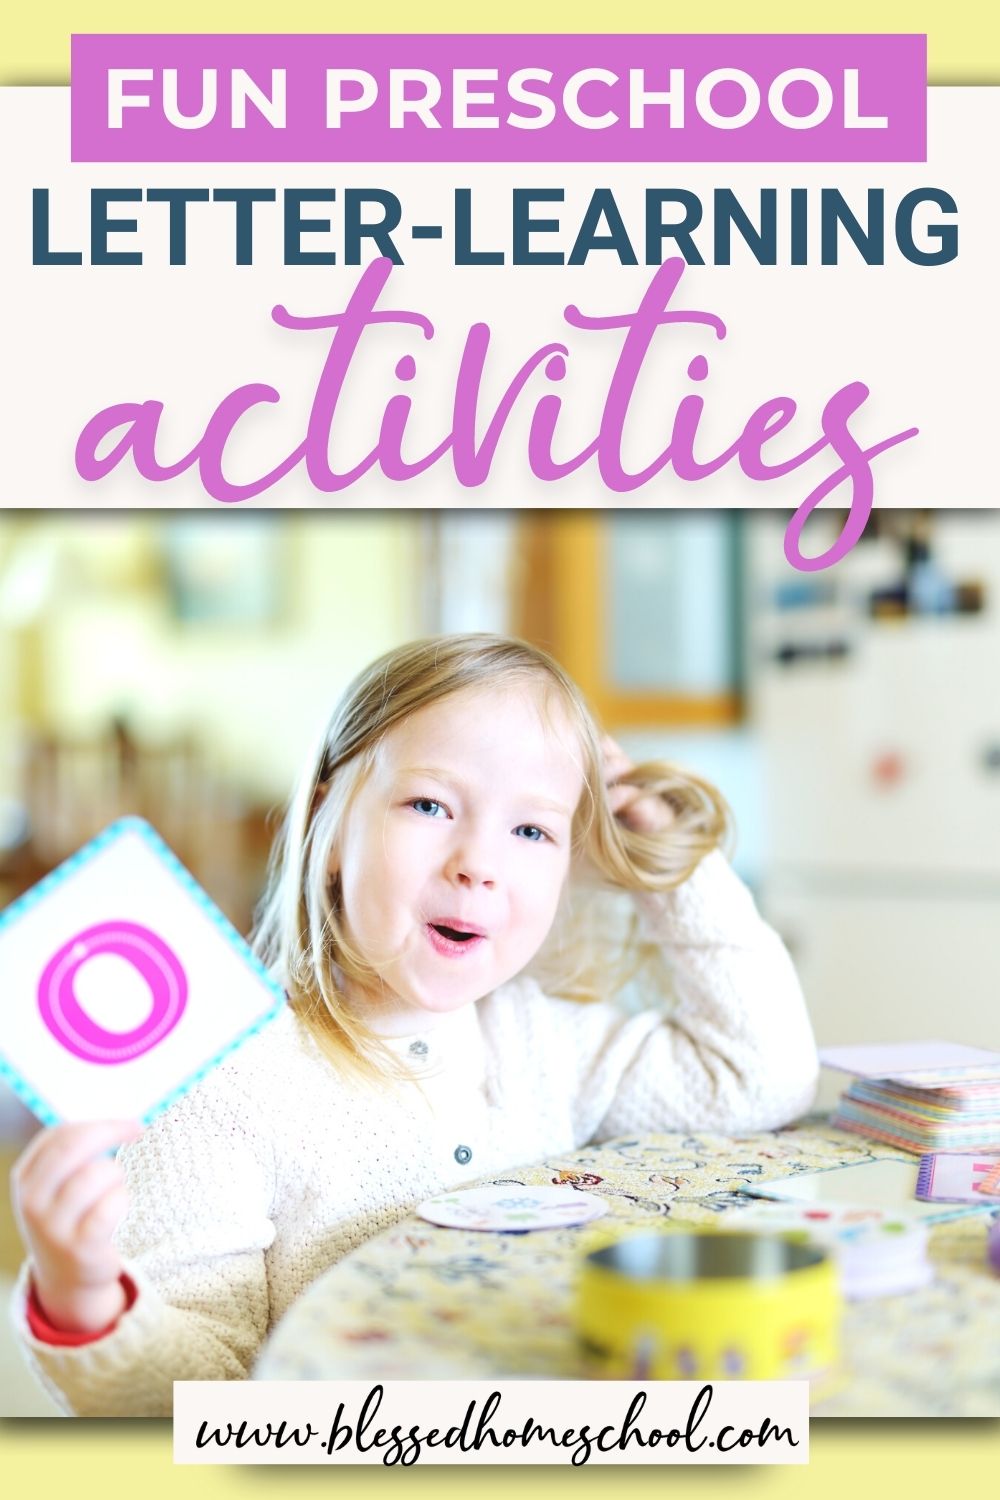 5 Practical Preschool Letter Activities to Make Learning Fun